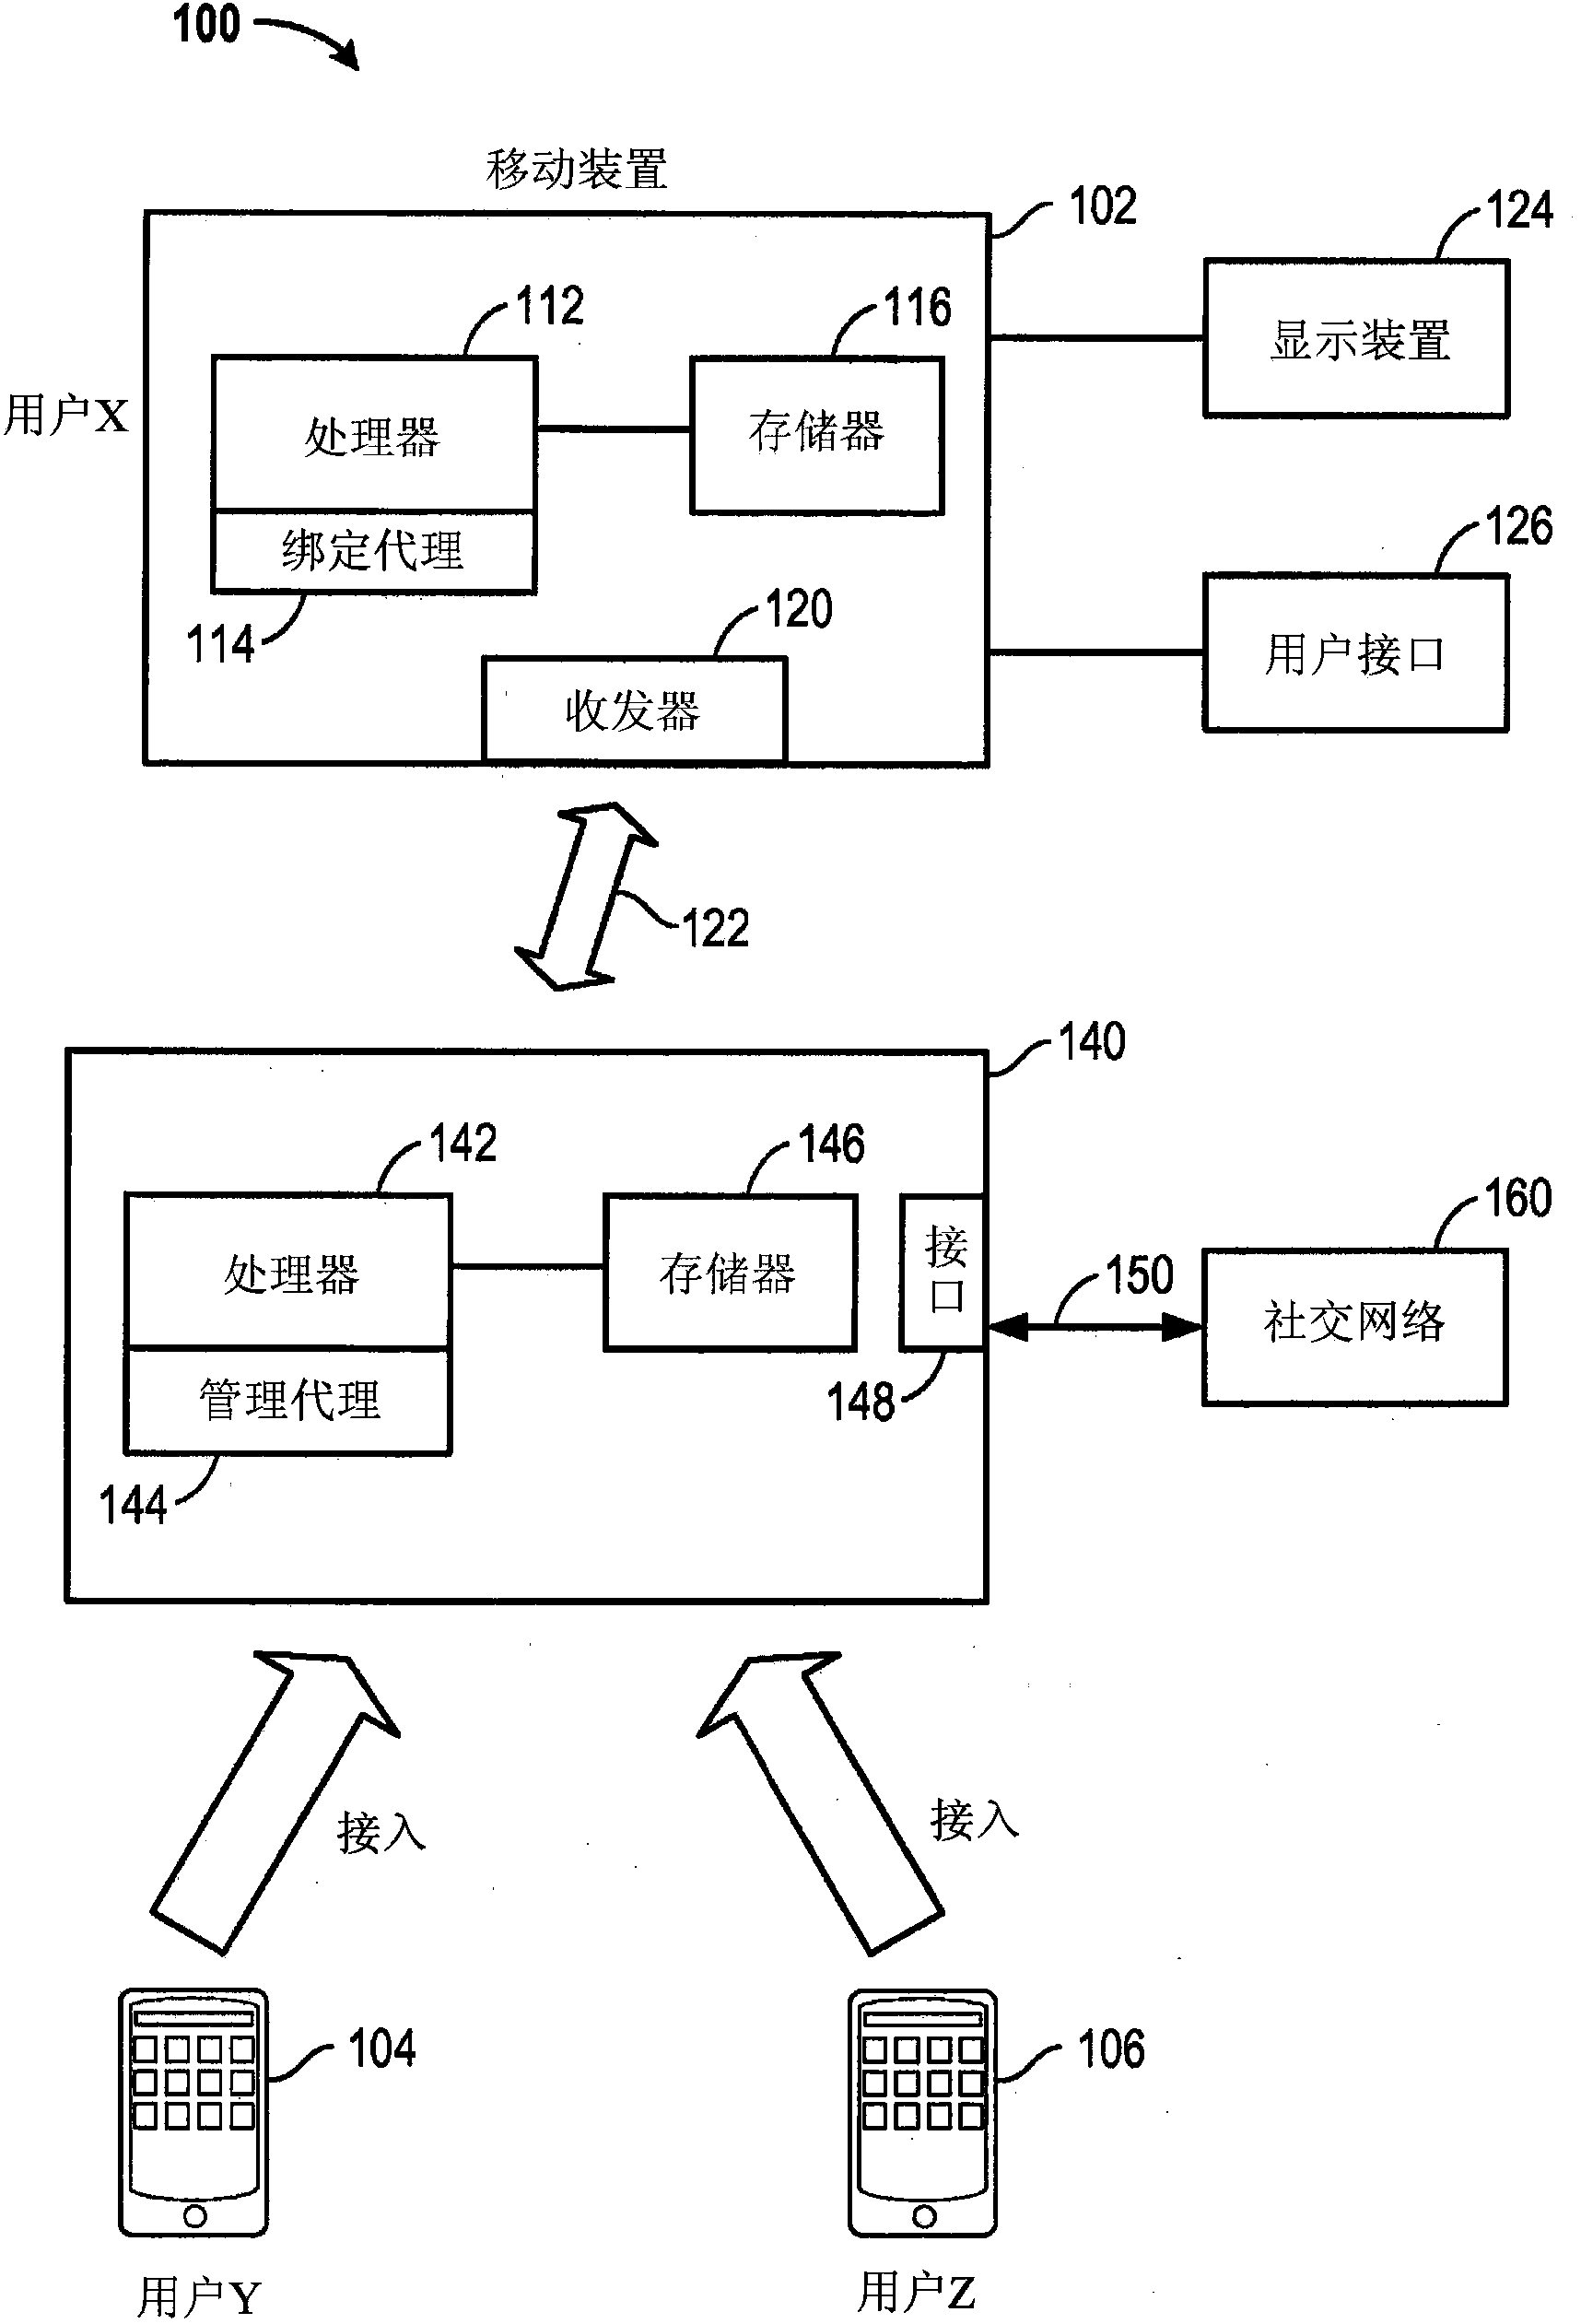 Mobile device authentication and access to a social network